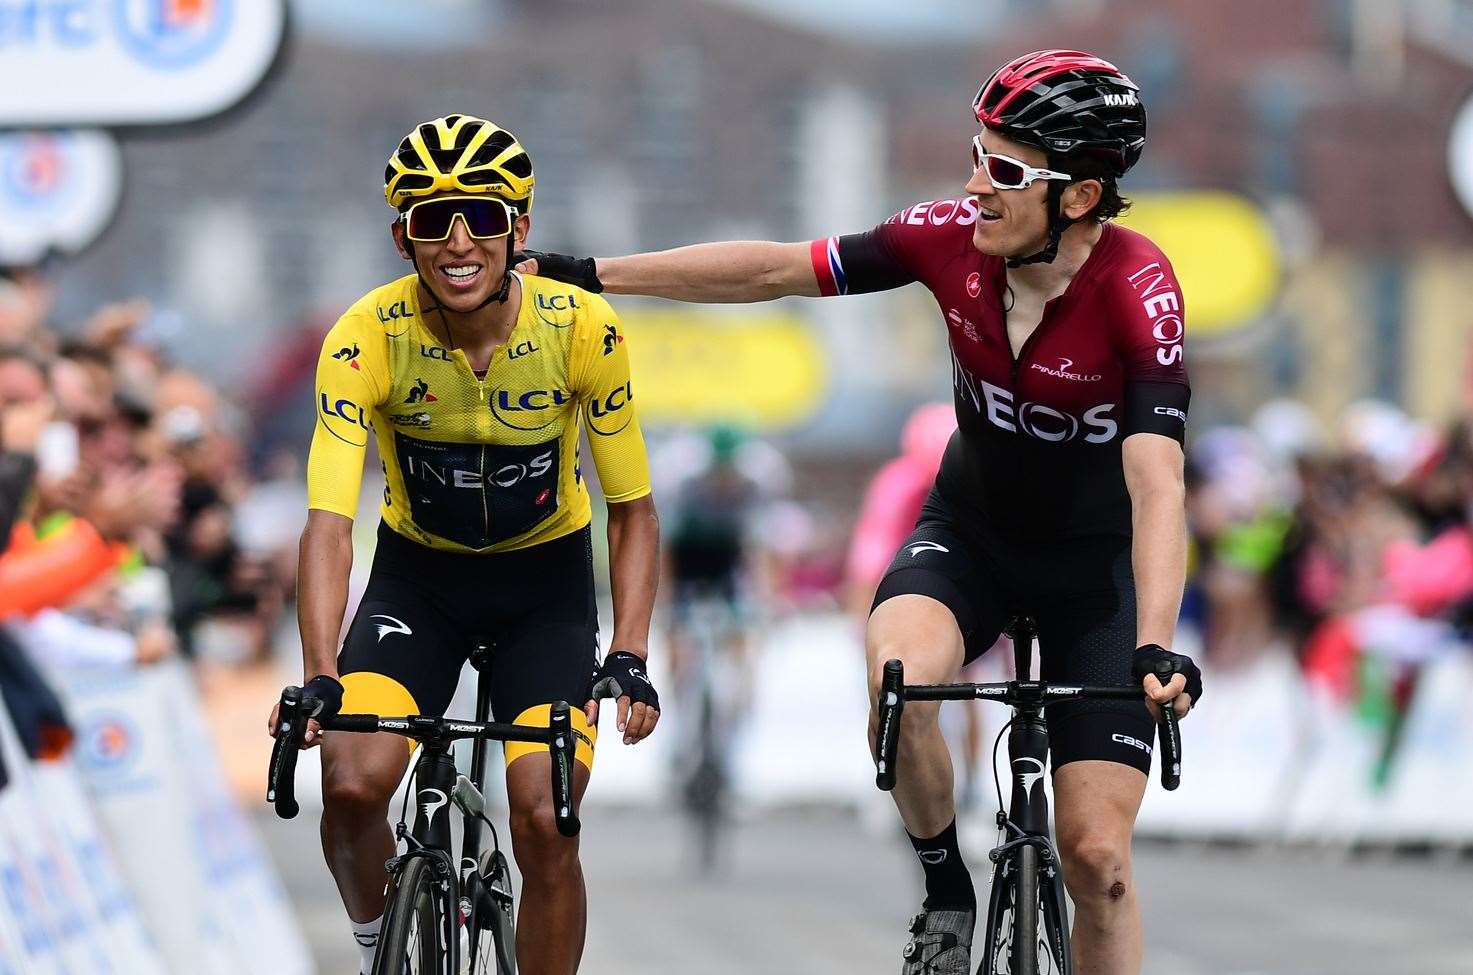 Egan Bernal, left, will be looking to defend his Tour de France title when the race starts this weekend. Picture: ASO / Alex BROADWAY